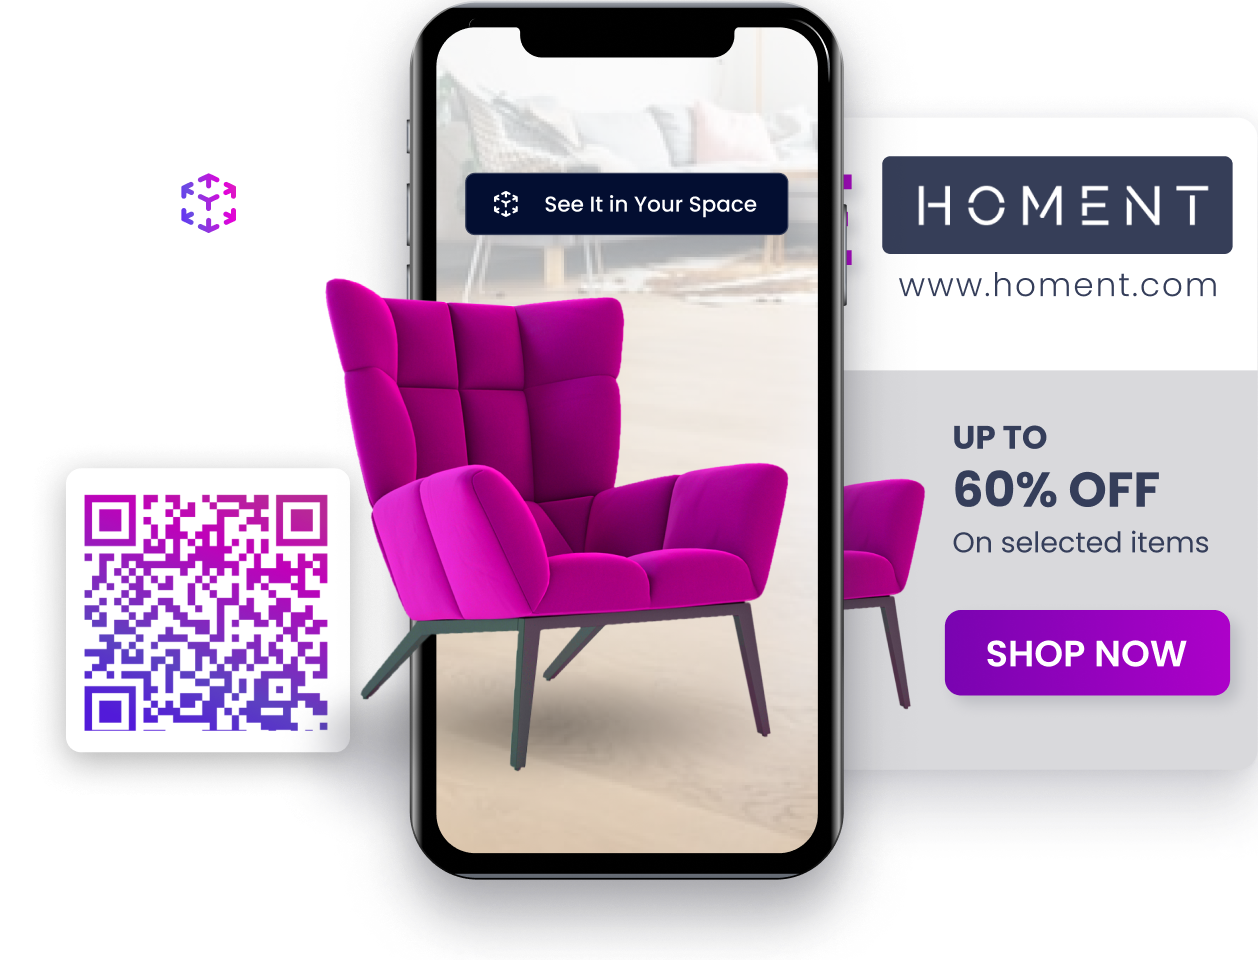 Ad shown on phone using ARitize to display pink chair in AR.